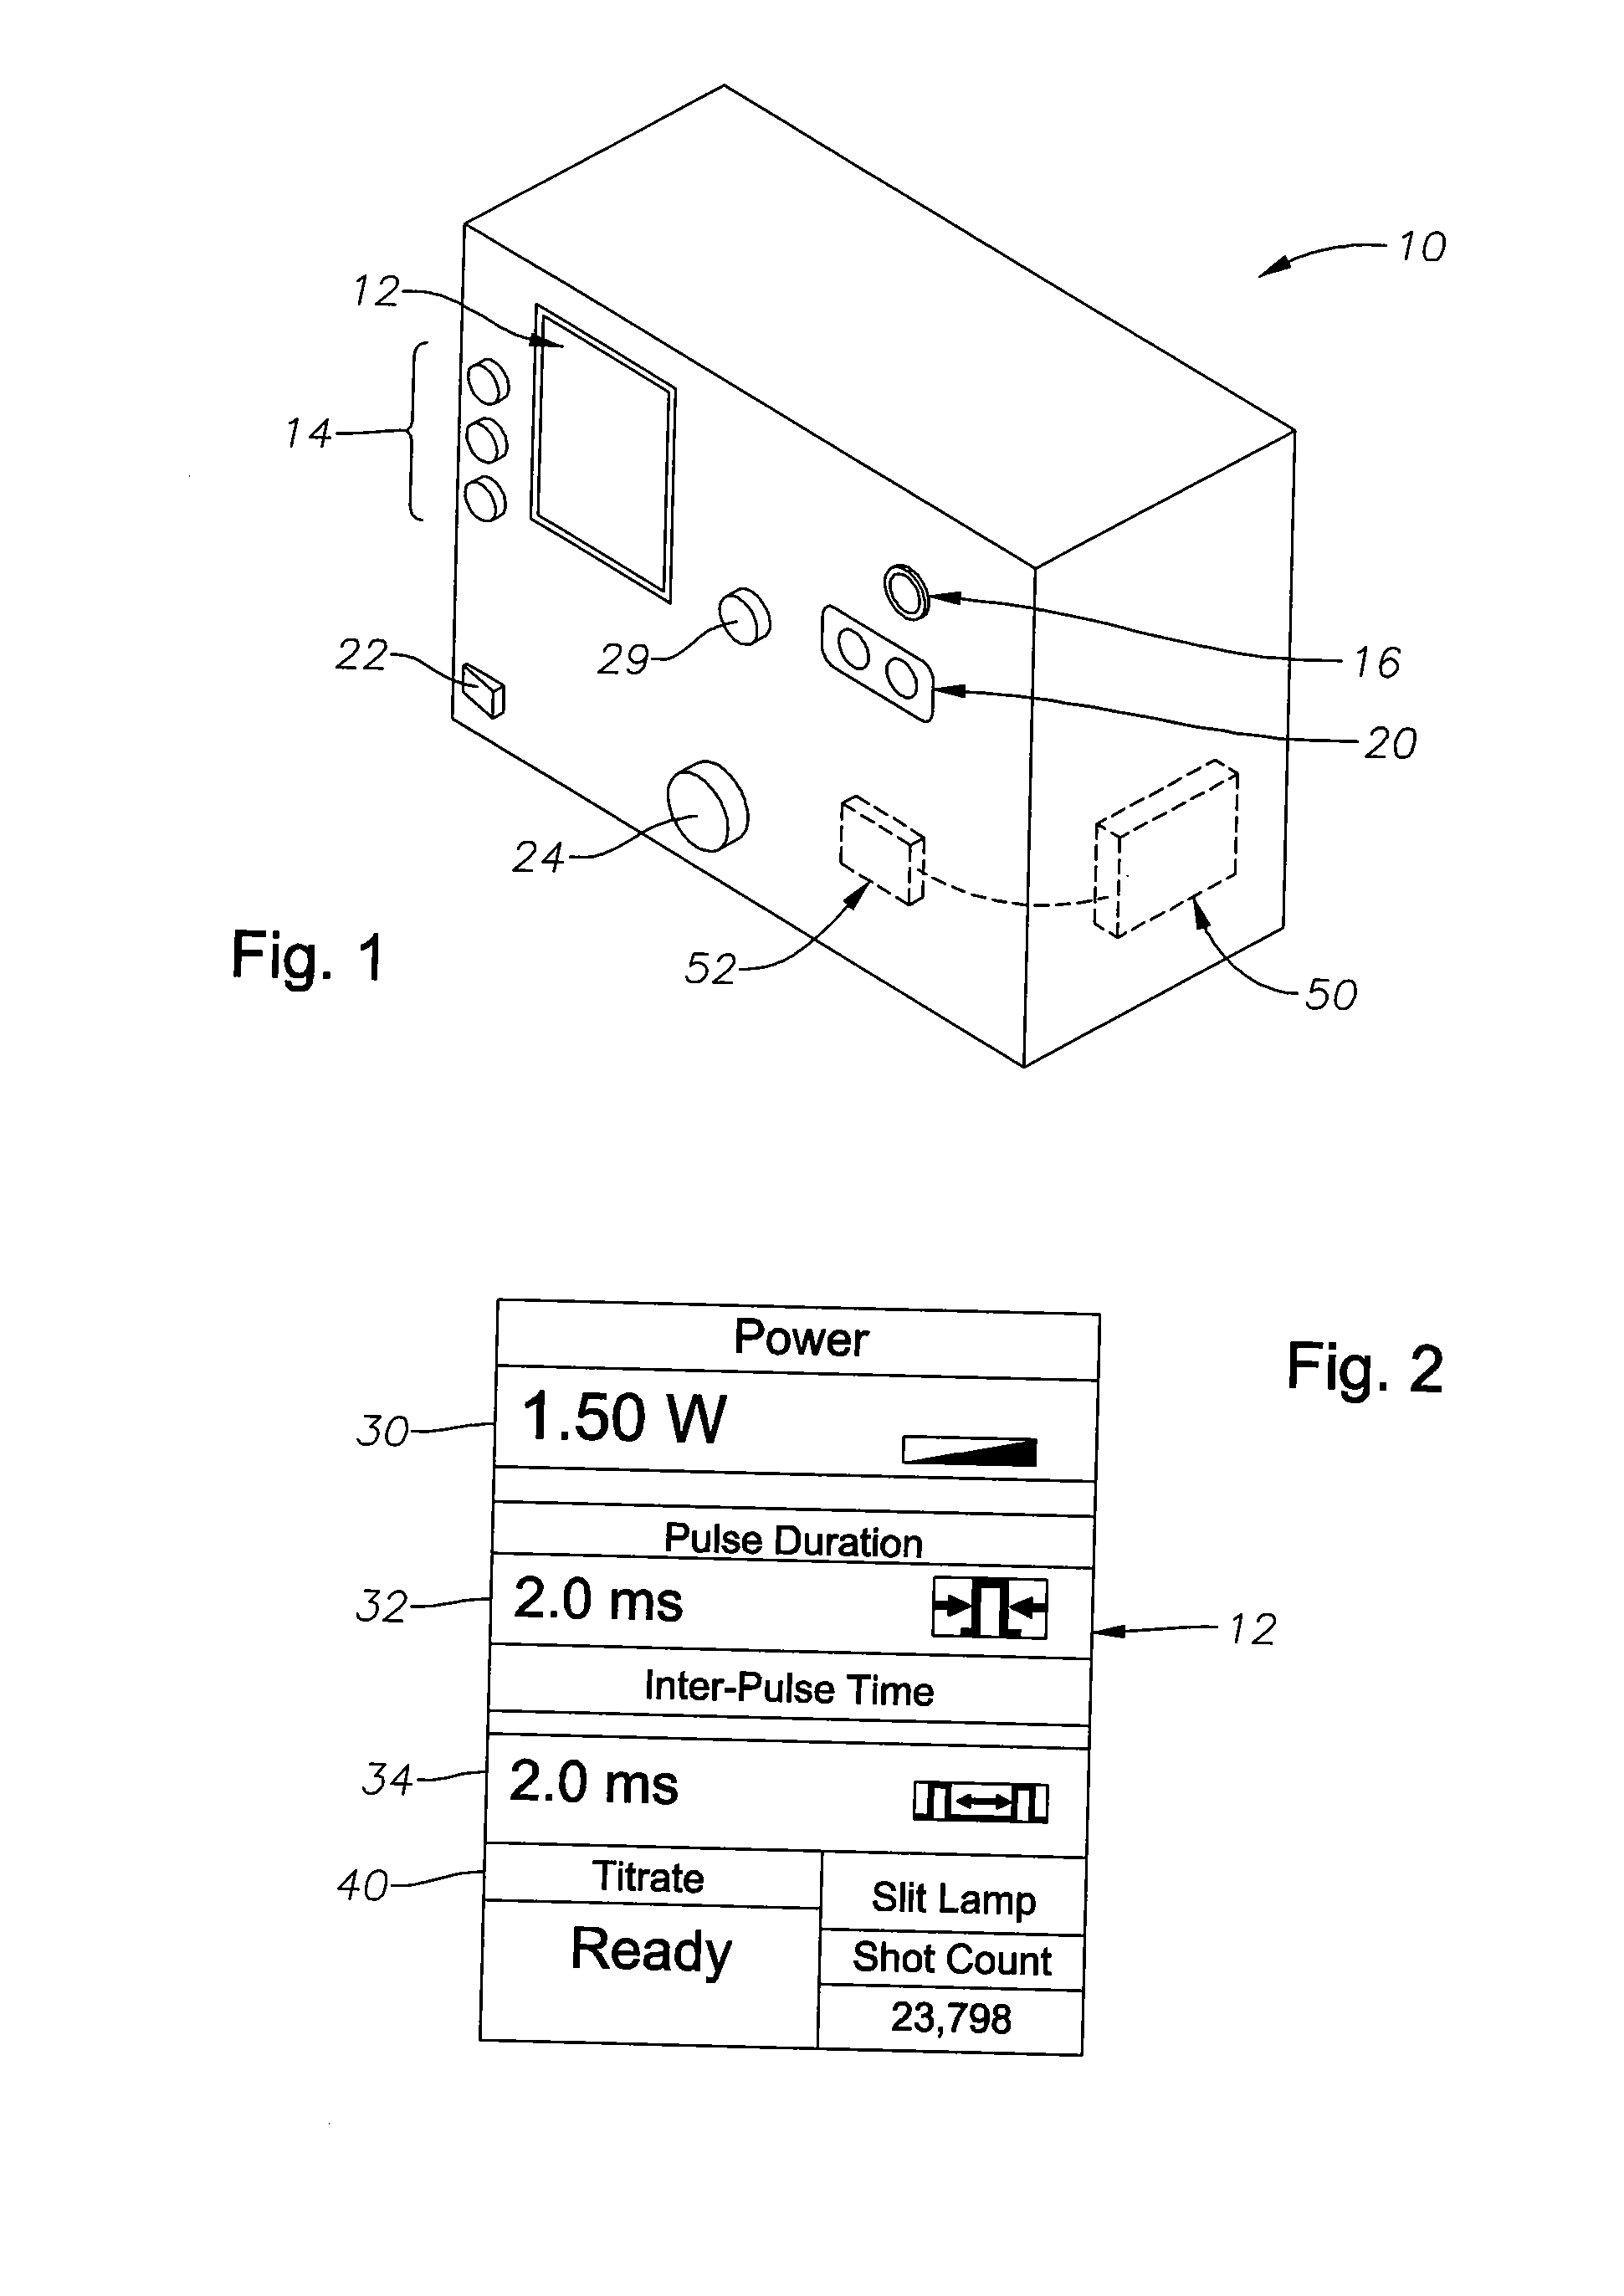 Apparatus and method for auto-titrating a laser